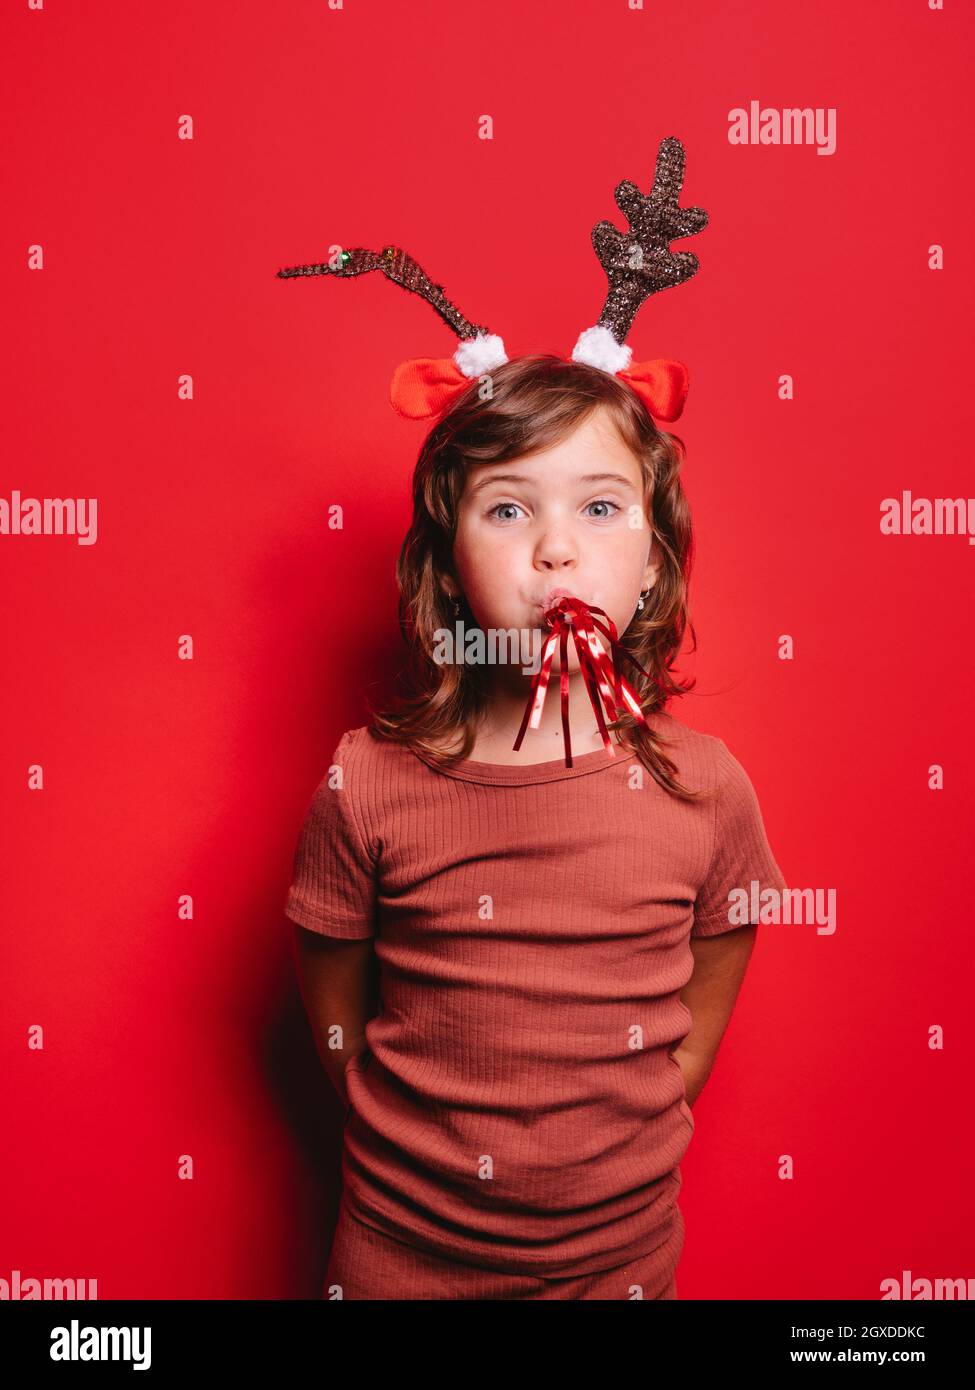 Joyful little girl in casual clothes and festive deer headband blowing party whistle and looking at camera during Christmas celebration against red ba Stock Photo